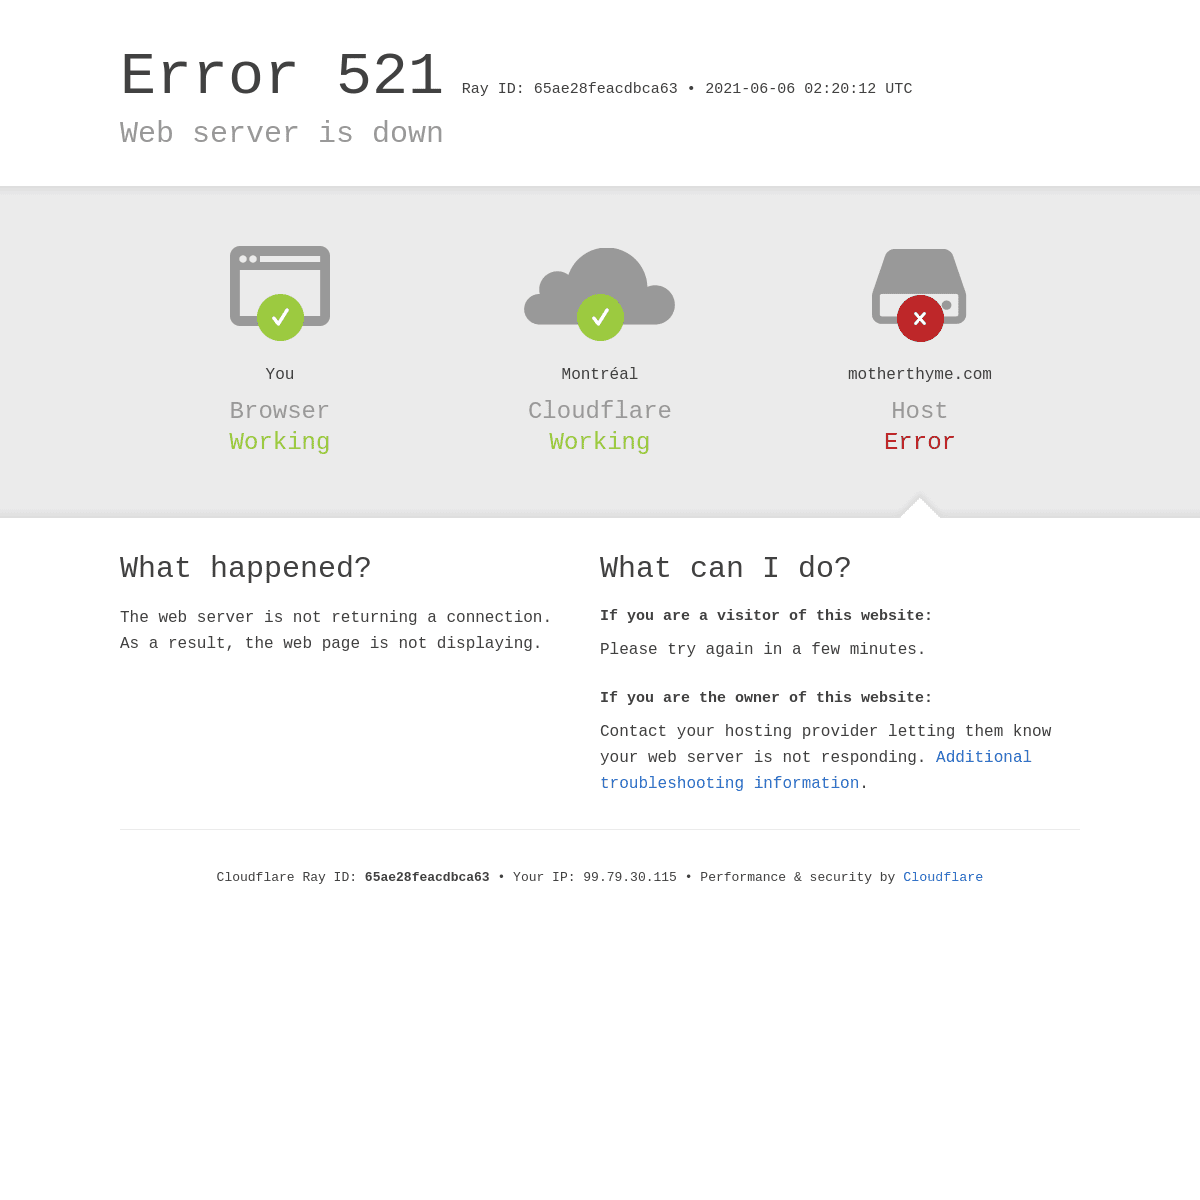 A complete backup of https://motherthyme.com